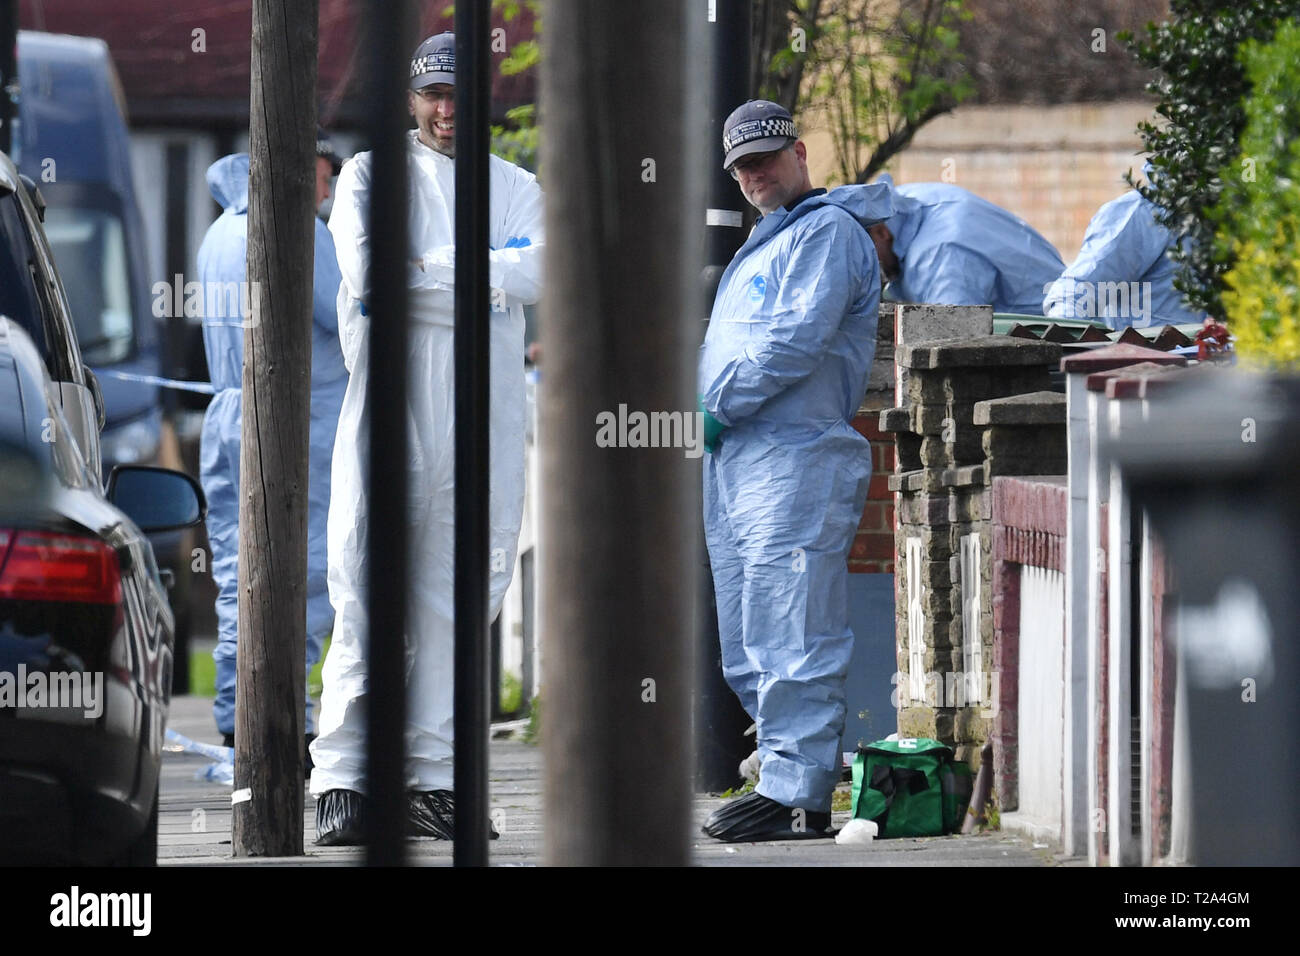 Police forensics officers on Aberdeen Road in north London, after four stabbings between Saturday evening and Sunday morning in the Edmonton area, which police are treating as potentially linked. Stock Photo